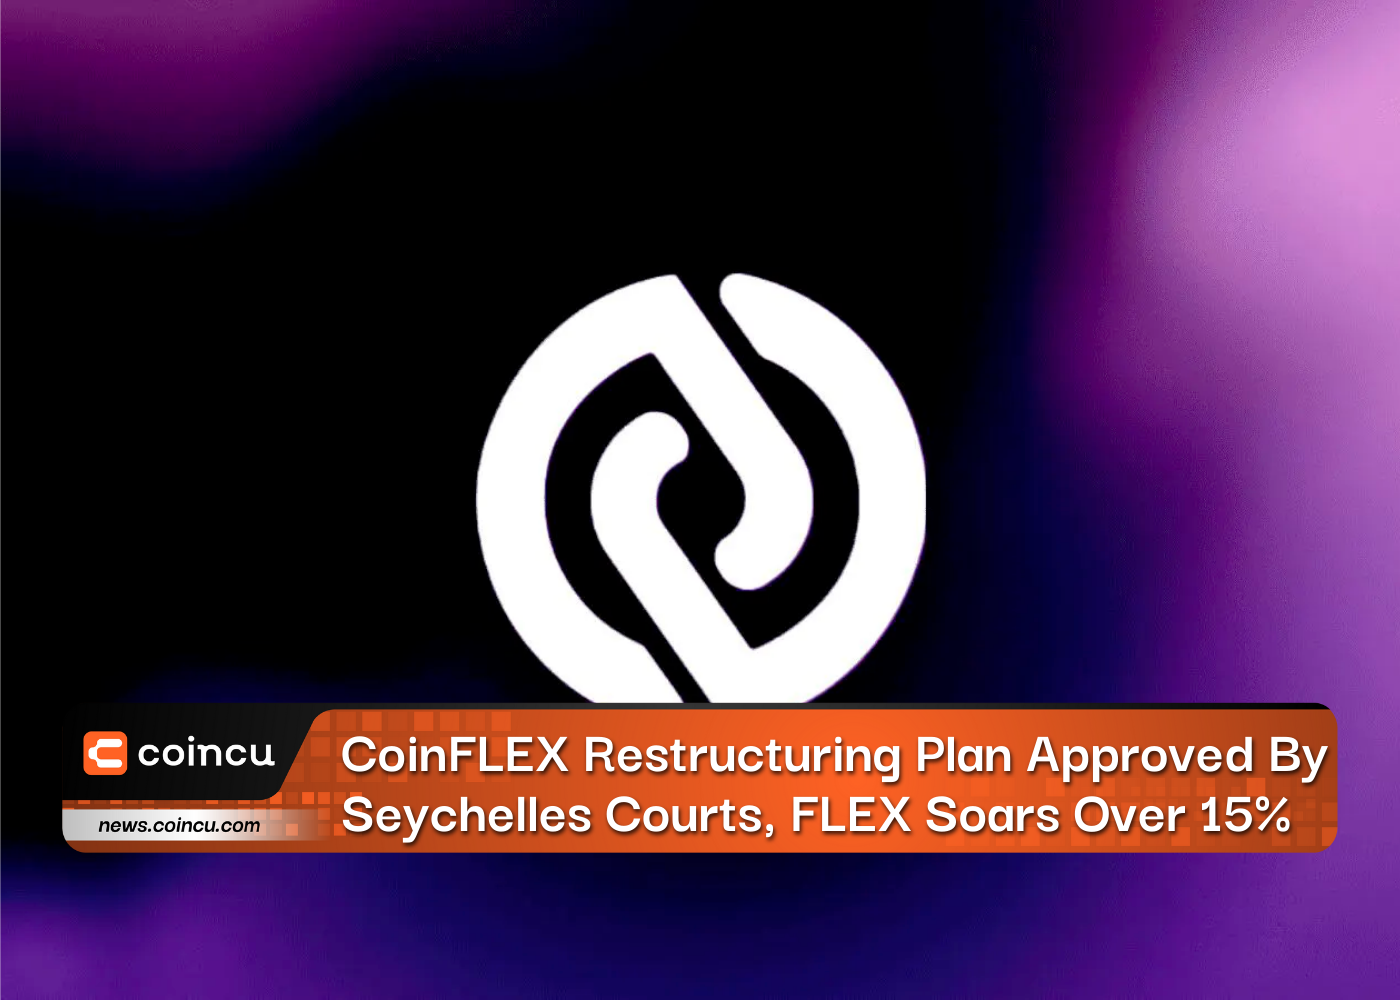 CoinFLEX Restructuring Plan Approved By Seychelles Courts, FLEX Soars Over 15%